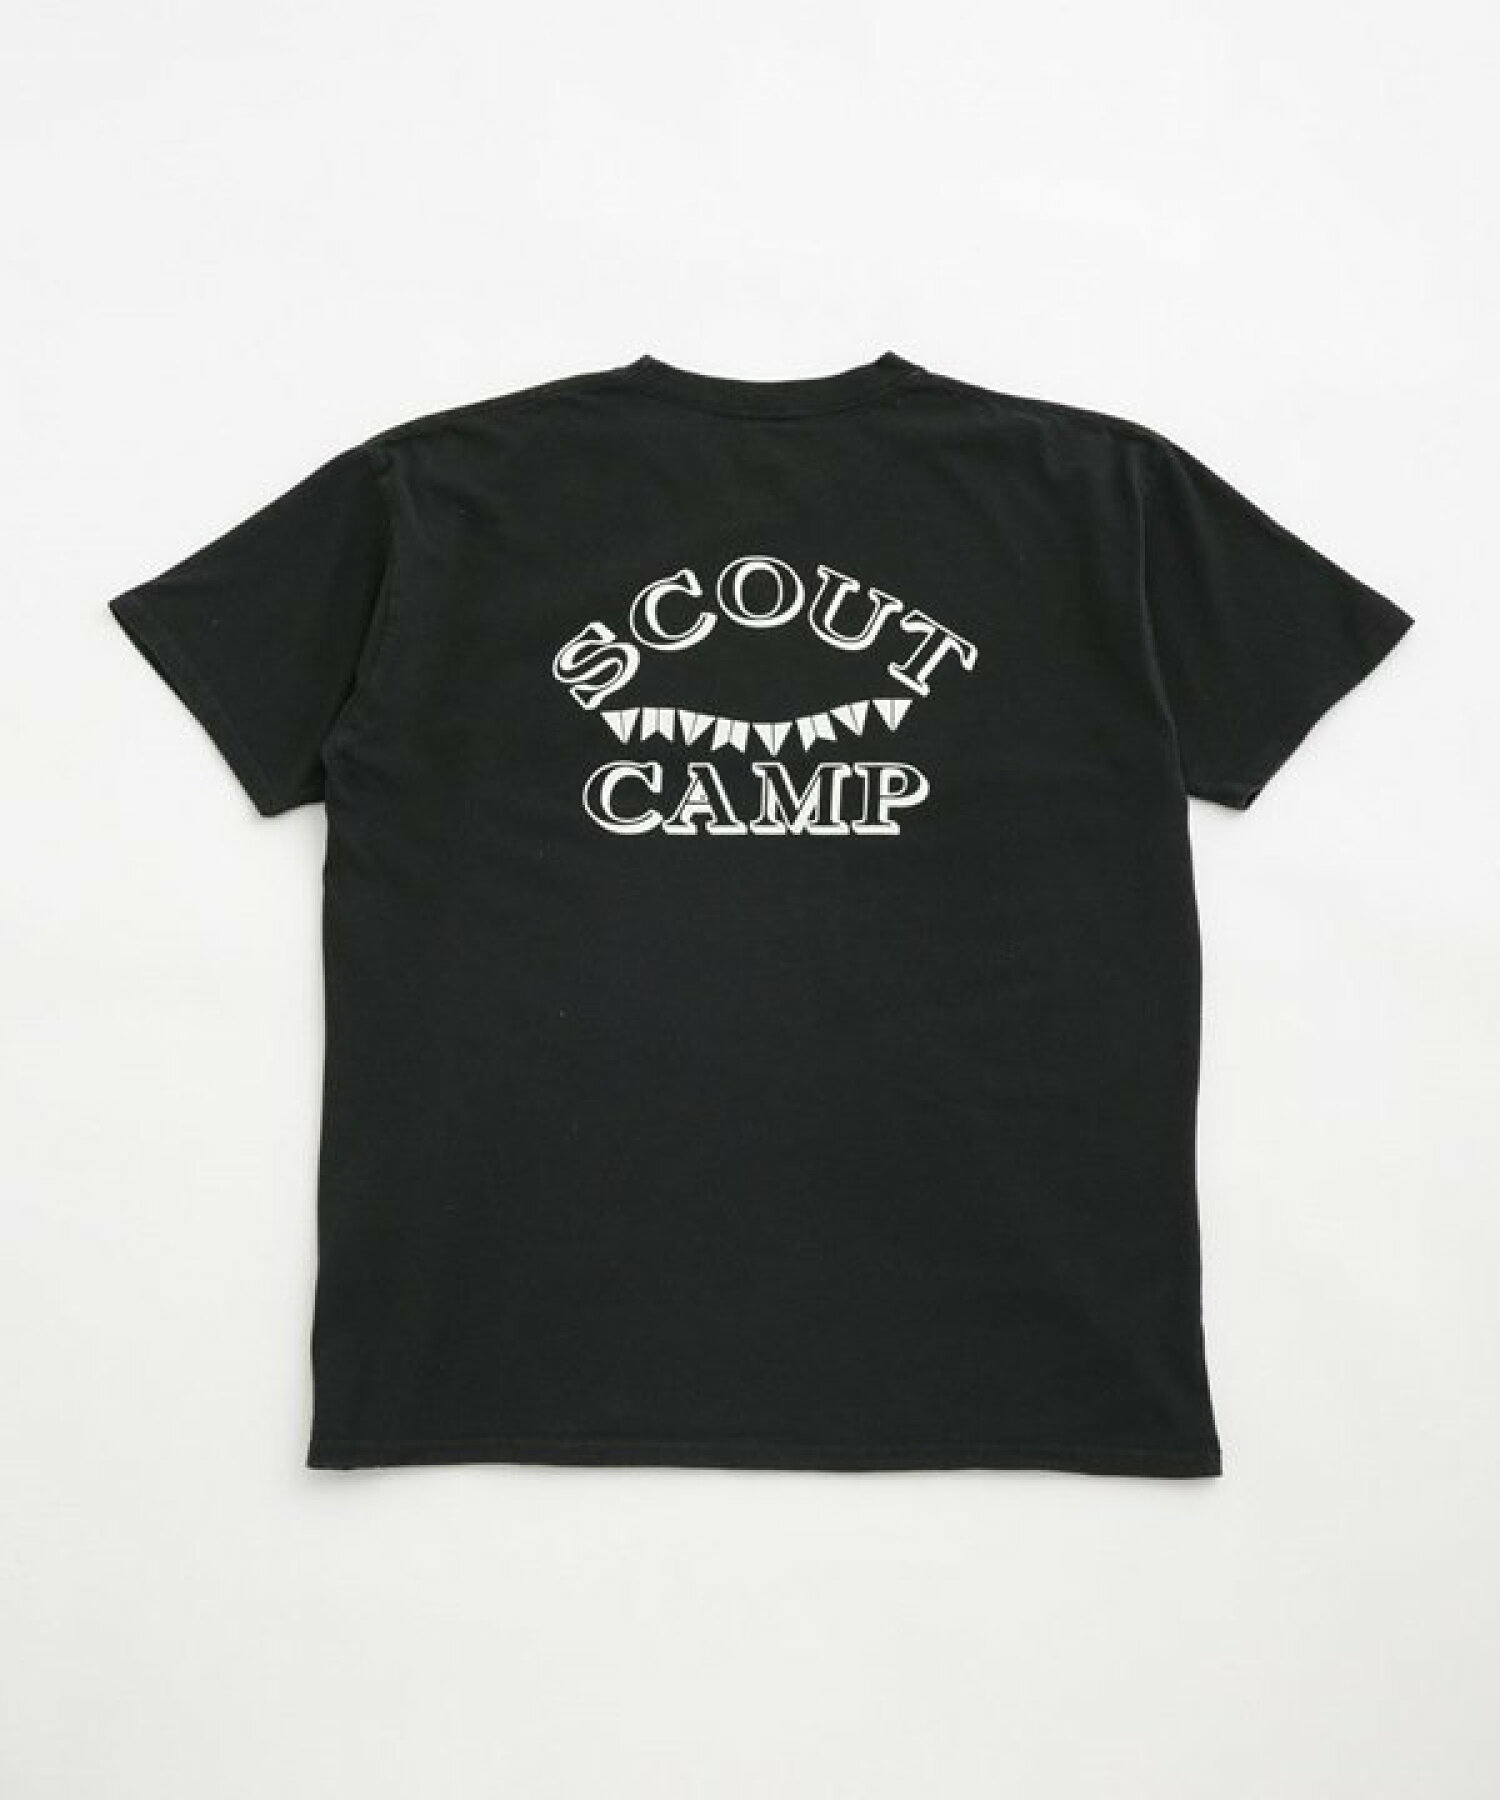 RUSSELL ATHLETIC/別注 Tee